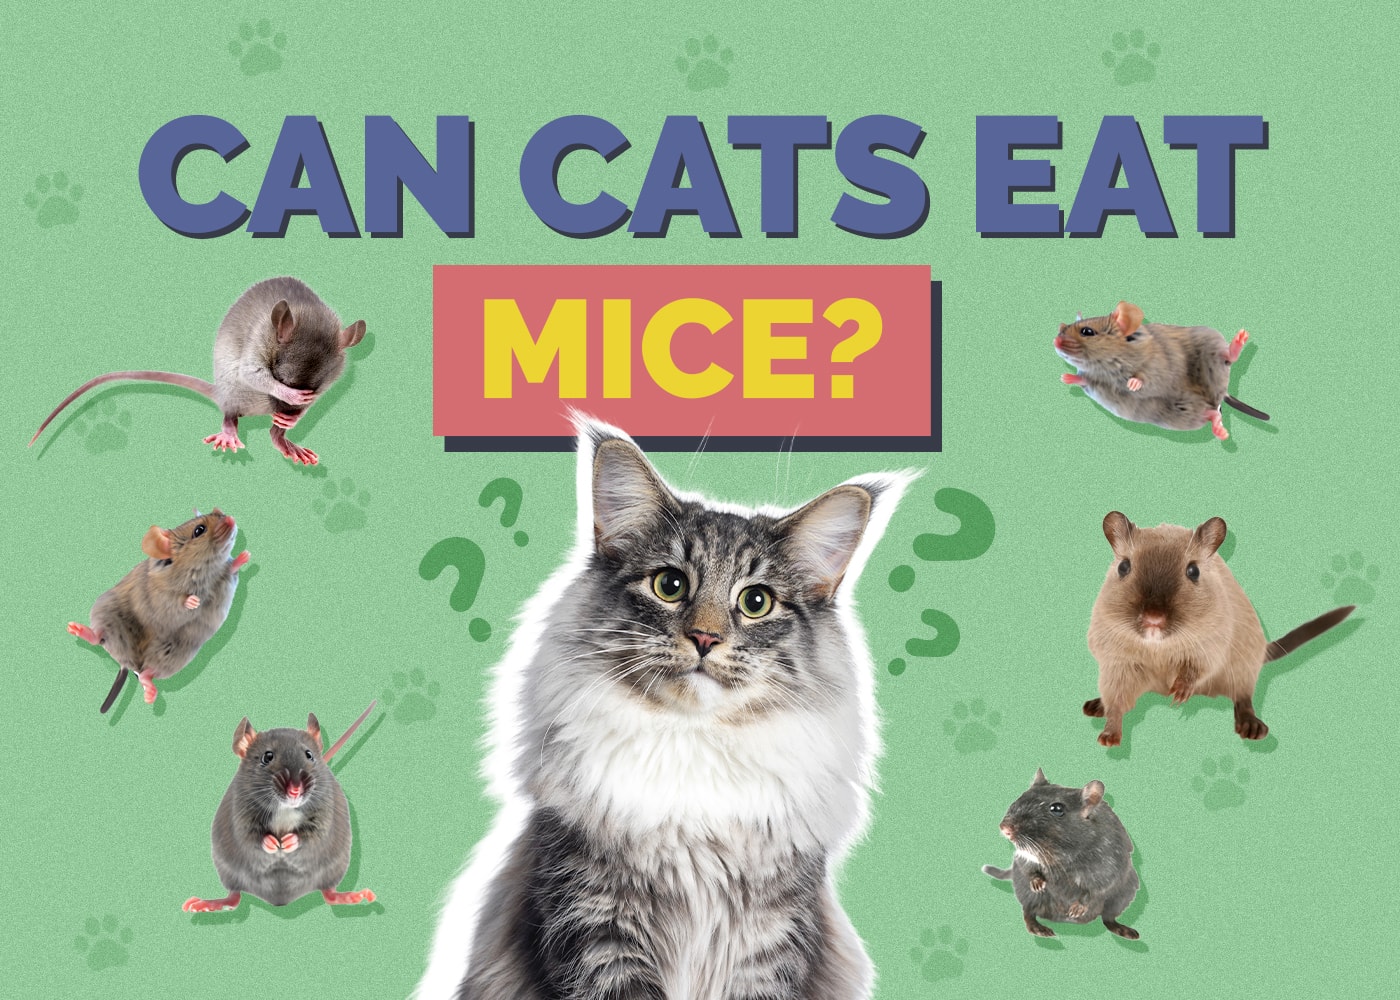 Can Cats Eat mice